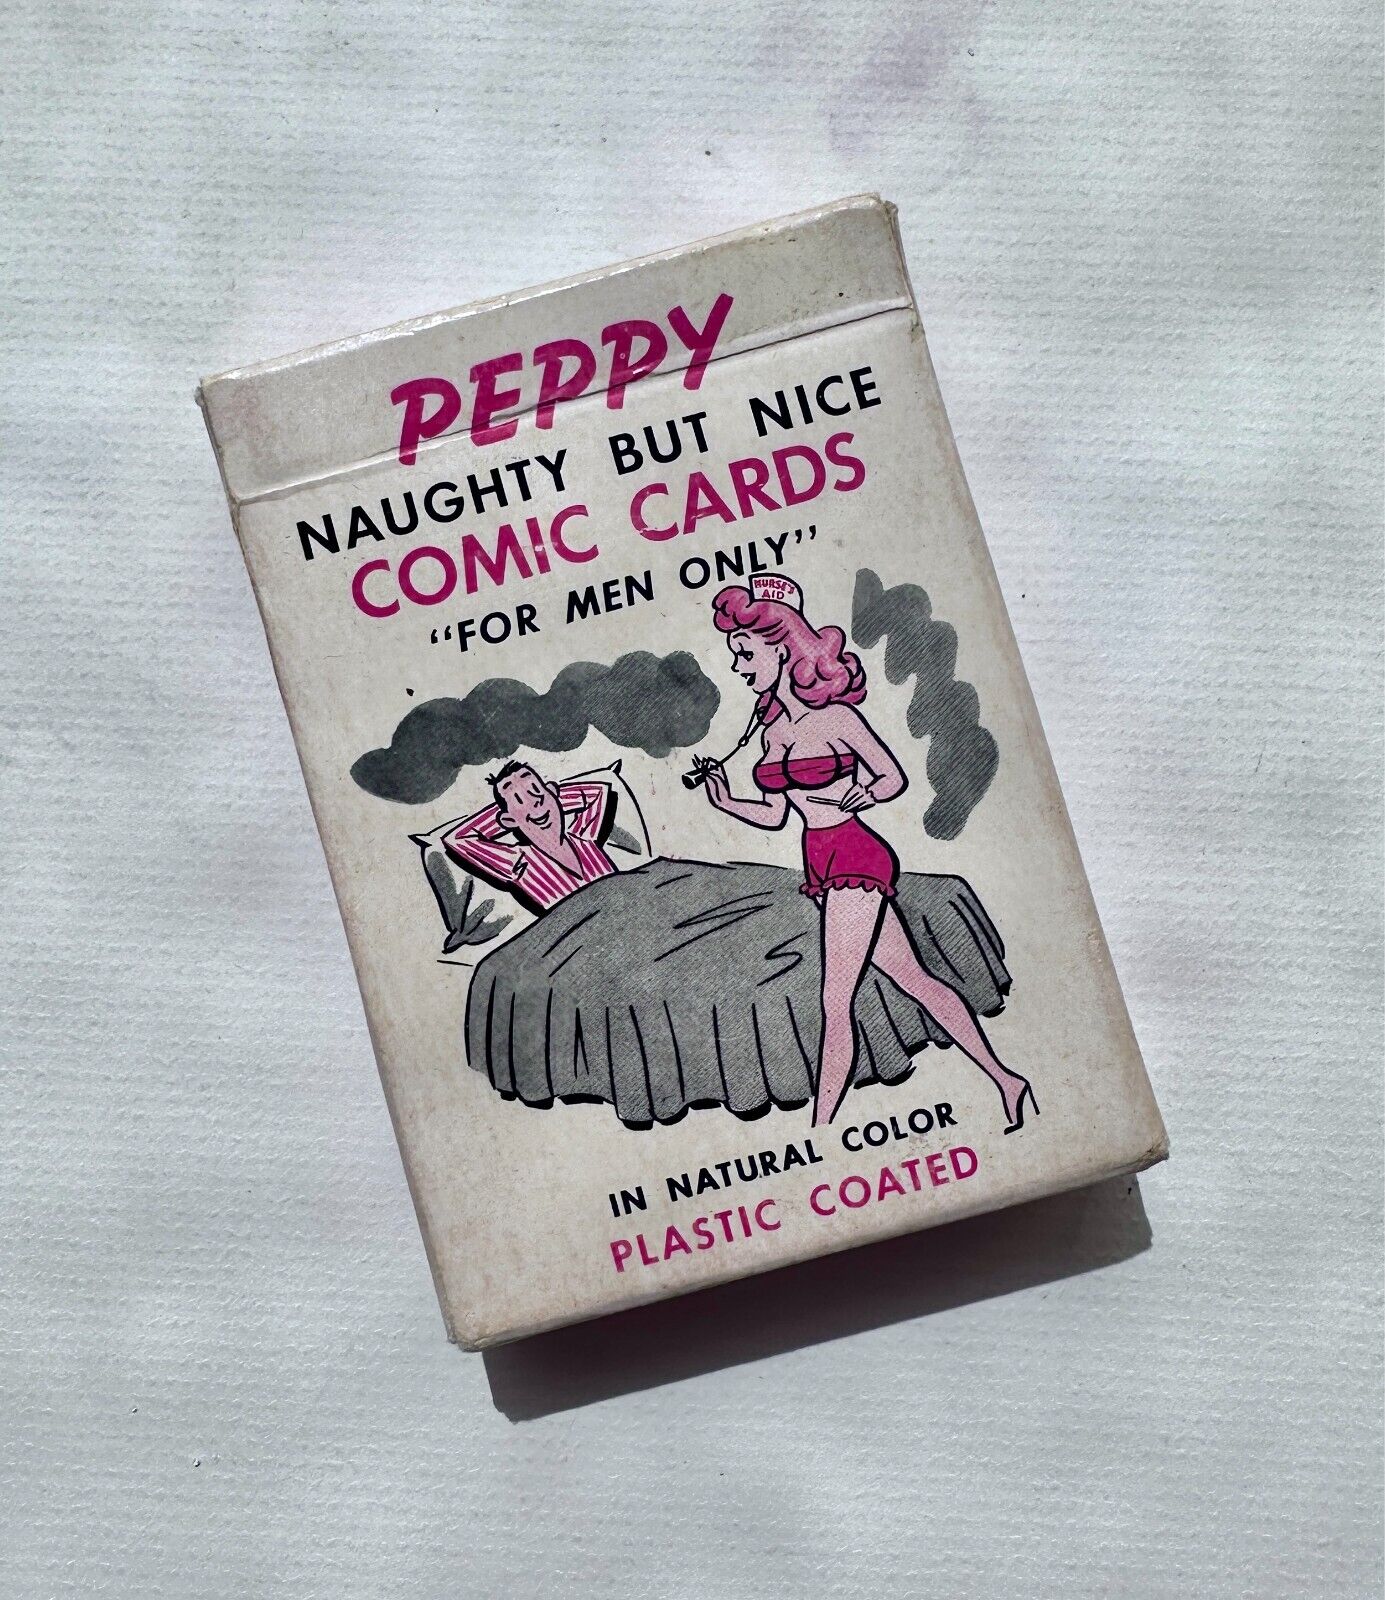 Vintage Complete Peppy Naughty But Nice Playing Cards Deck In Original Box